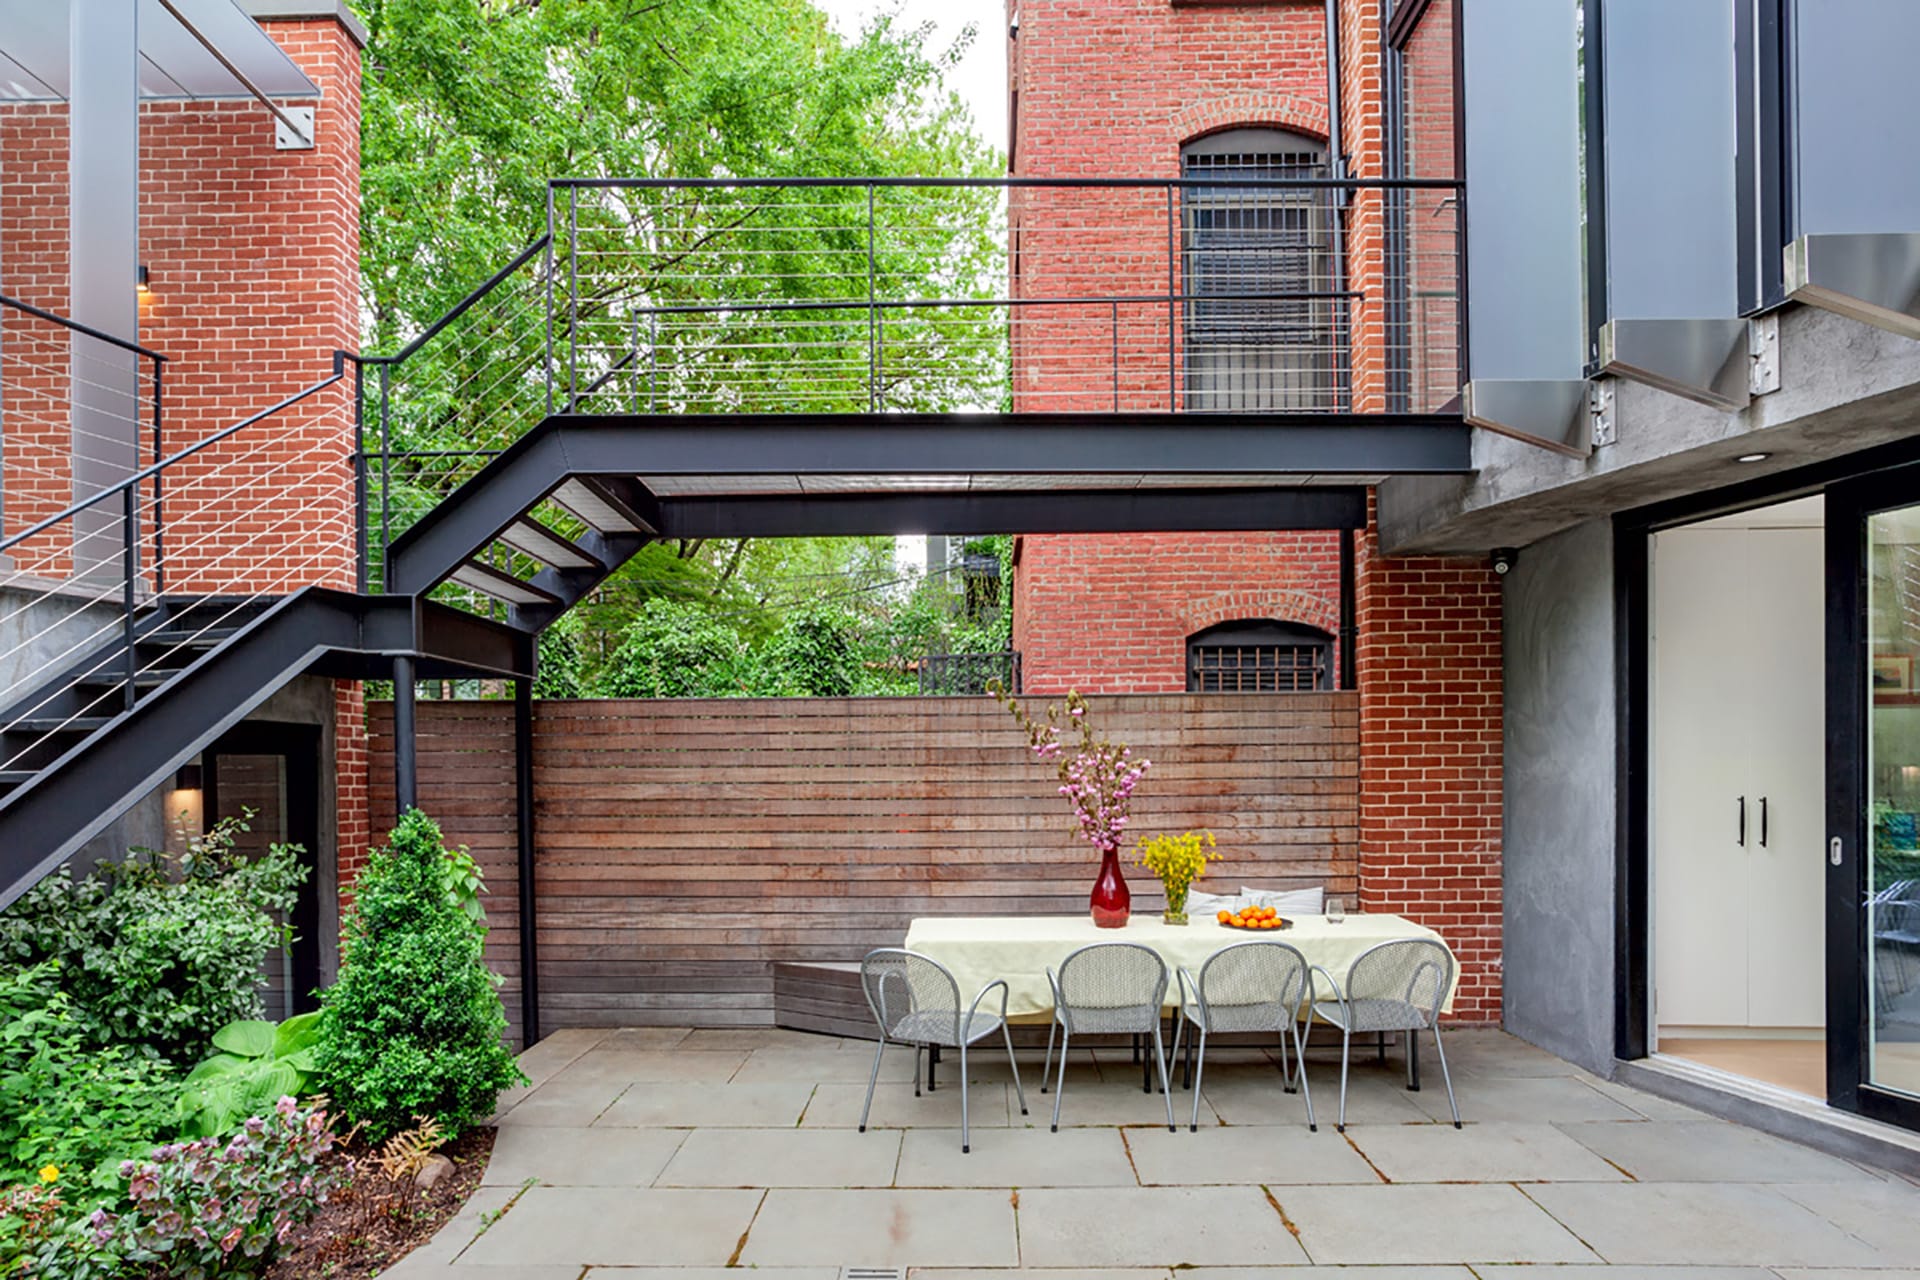 Rear yard of a Park Slope townhouse in between the main home and detached garage, with a suspended catwalk, picnic table, and landscaping